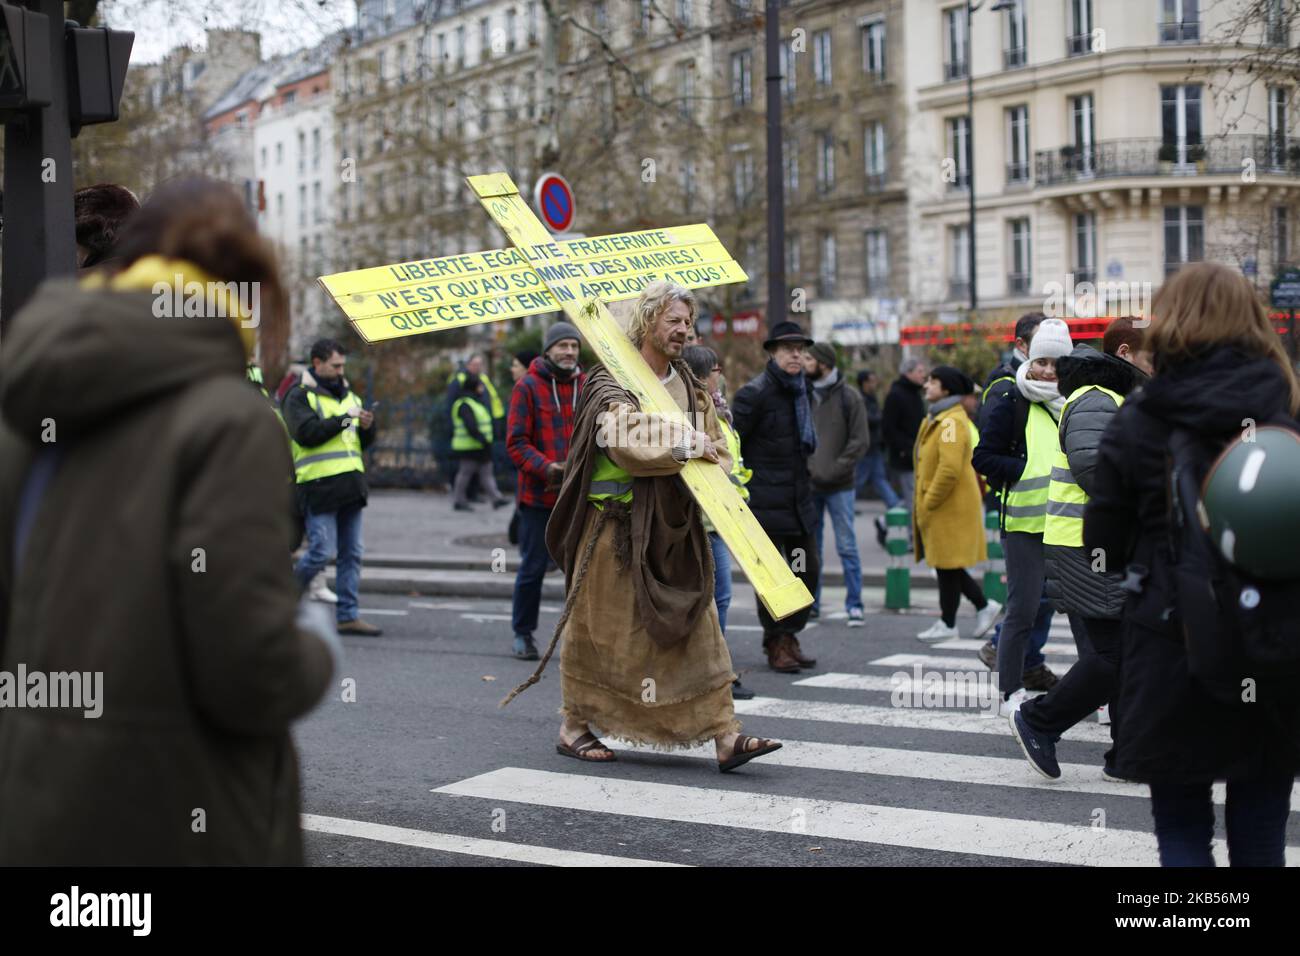 Protesters take part a demonstration called by the collective 'Jour de  Colere', or 'Day Of Wrath', in Lyon, France, on April 06, 2014. The  demonstration brought together a motley group of anti-government